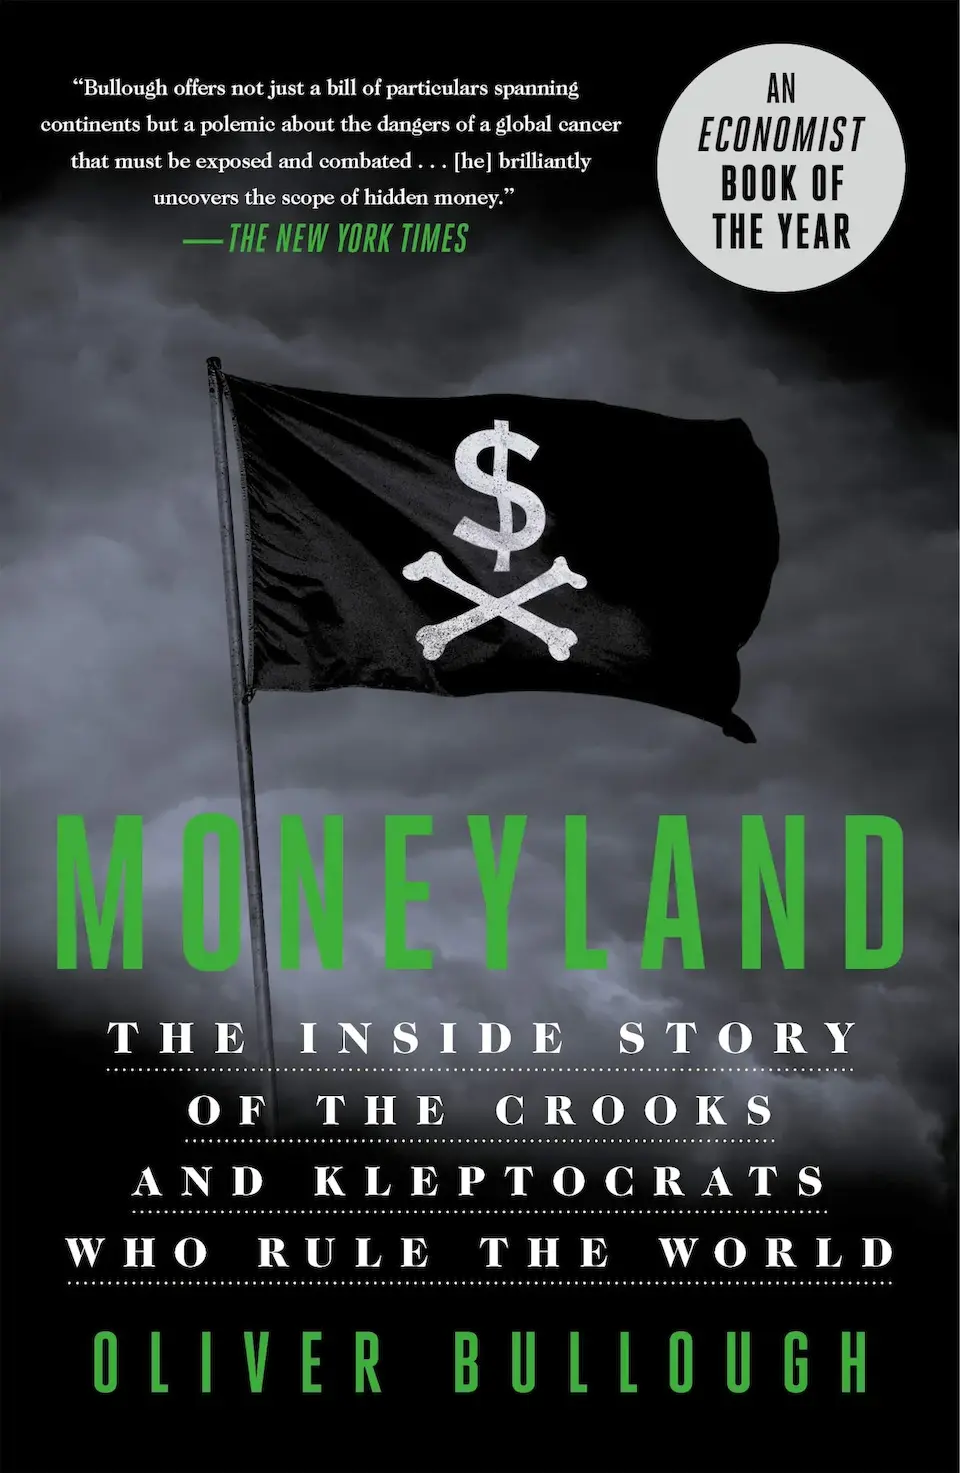 Moneyland by Oliver Bullough finished on 2021 Dec 16